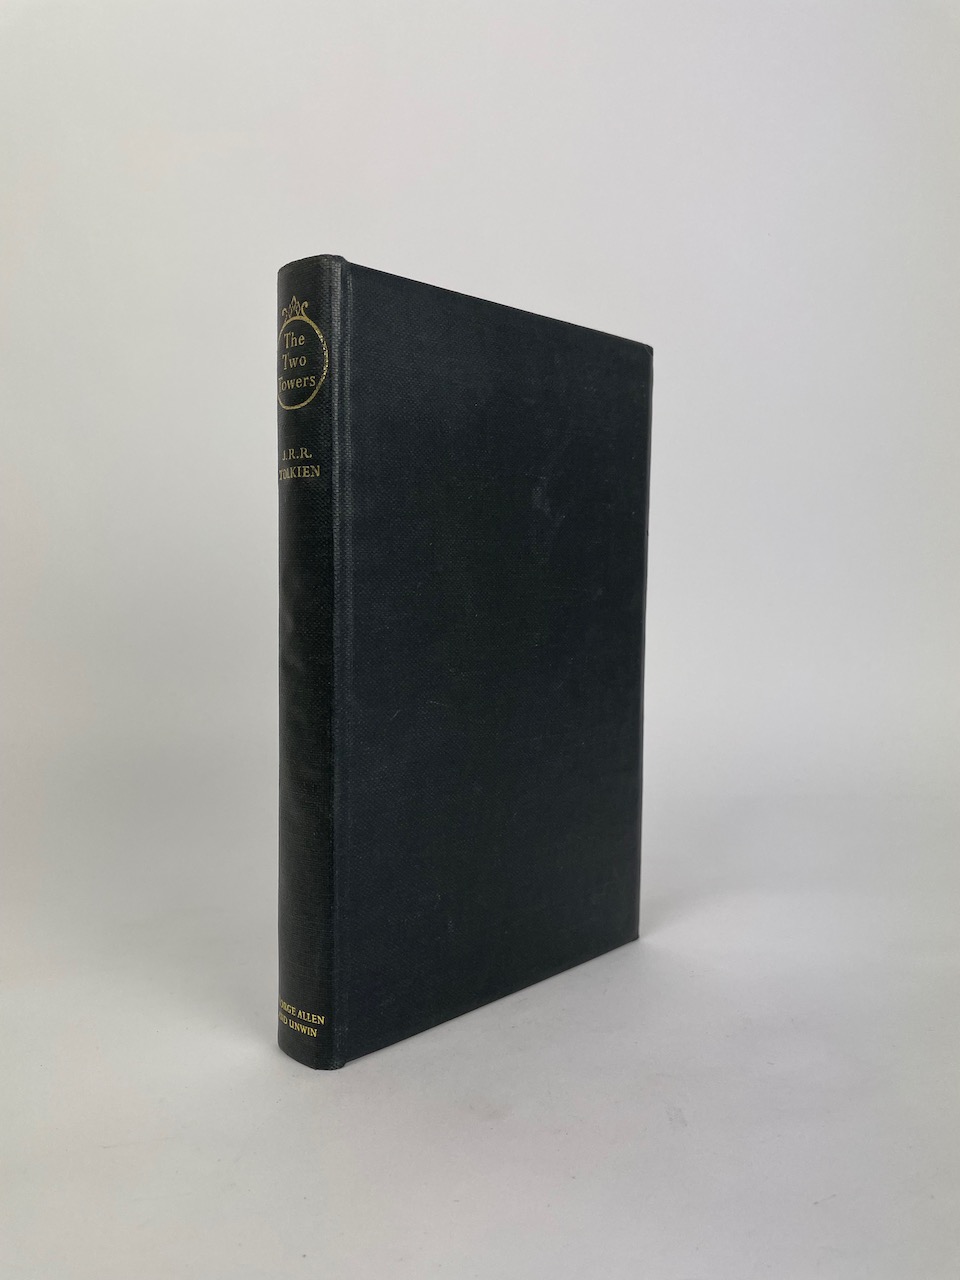 
1963 1st UK Lord of the Rings Deluxe Edition 17